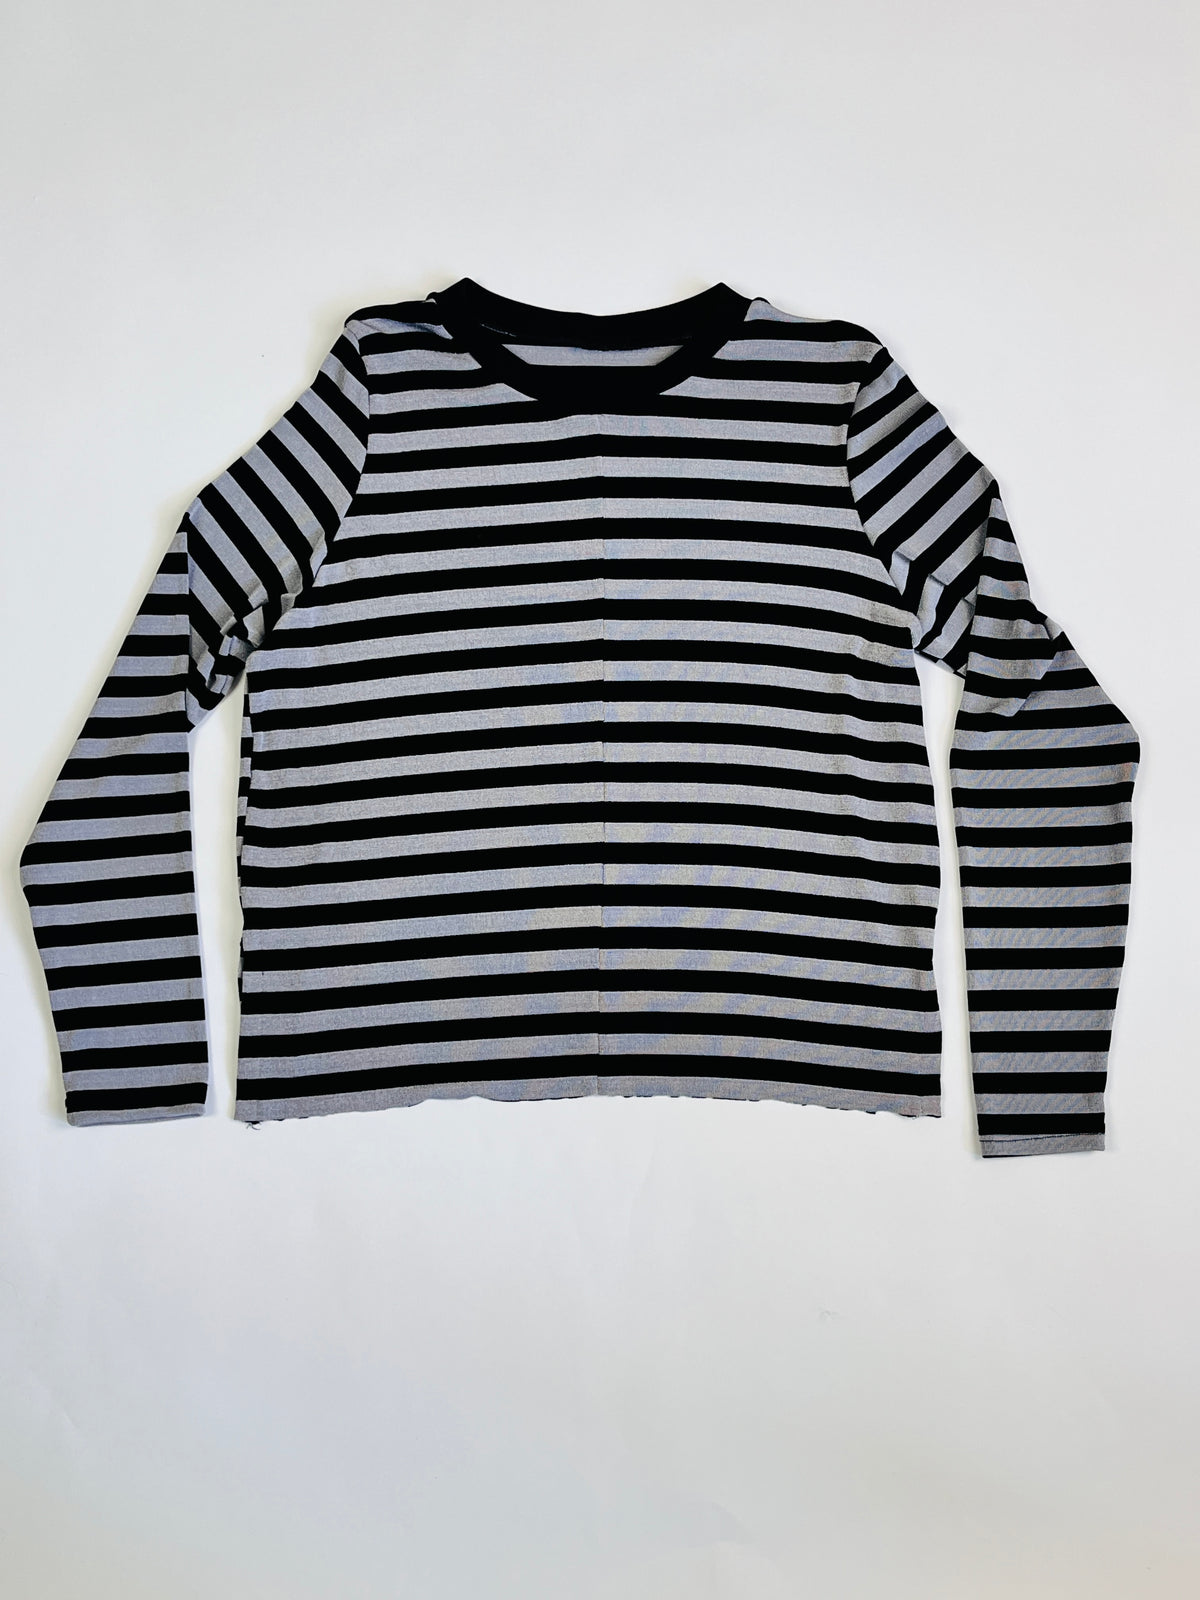 Vintage Black and Silver Striped Top